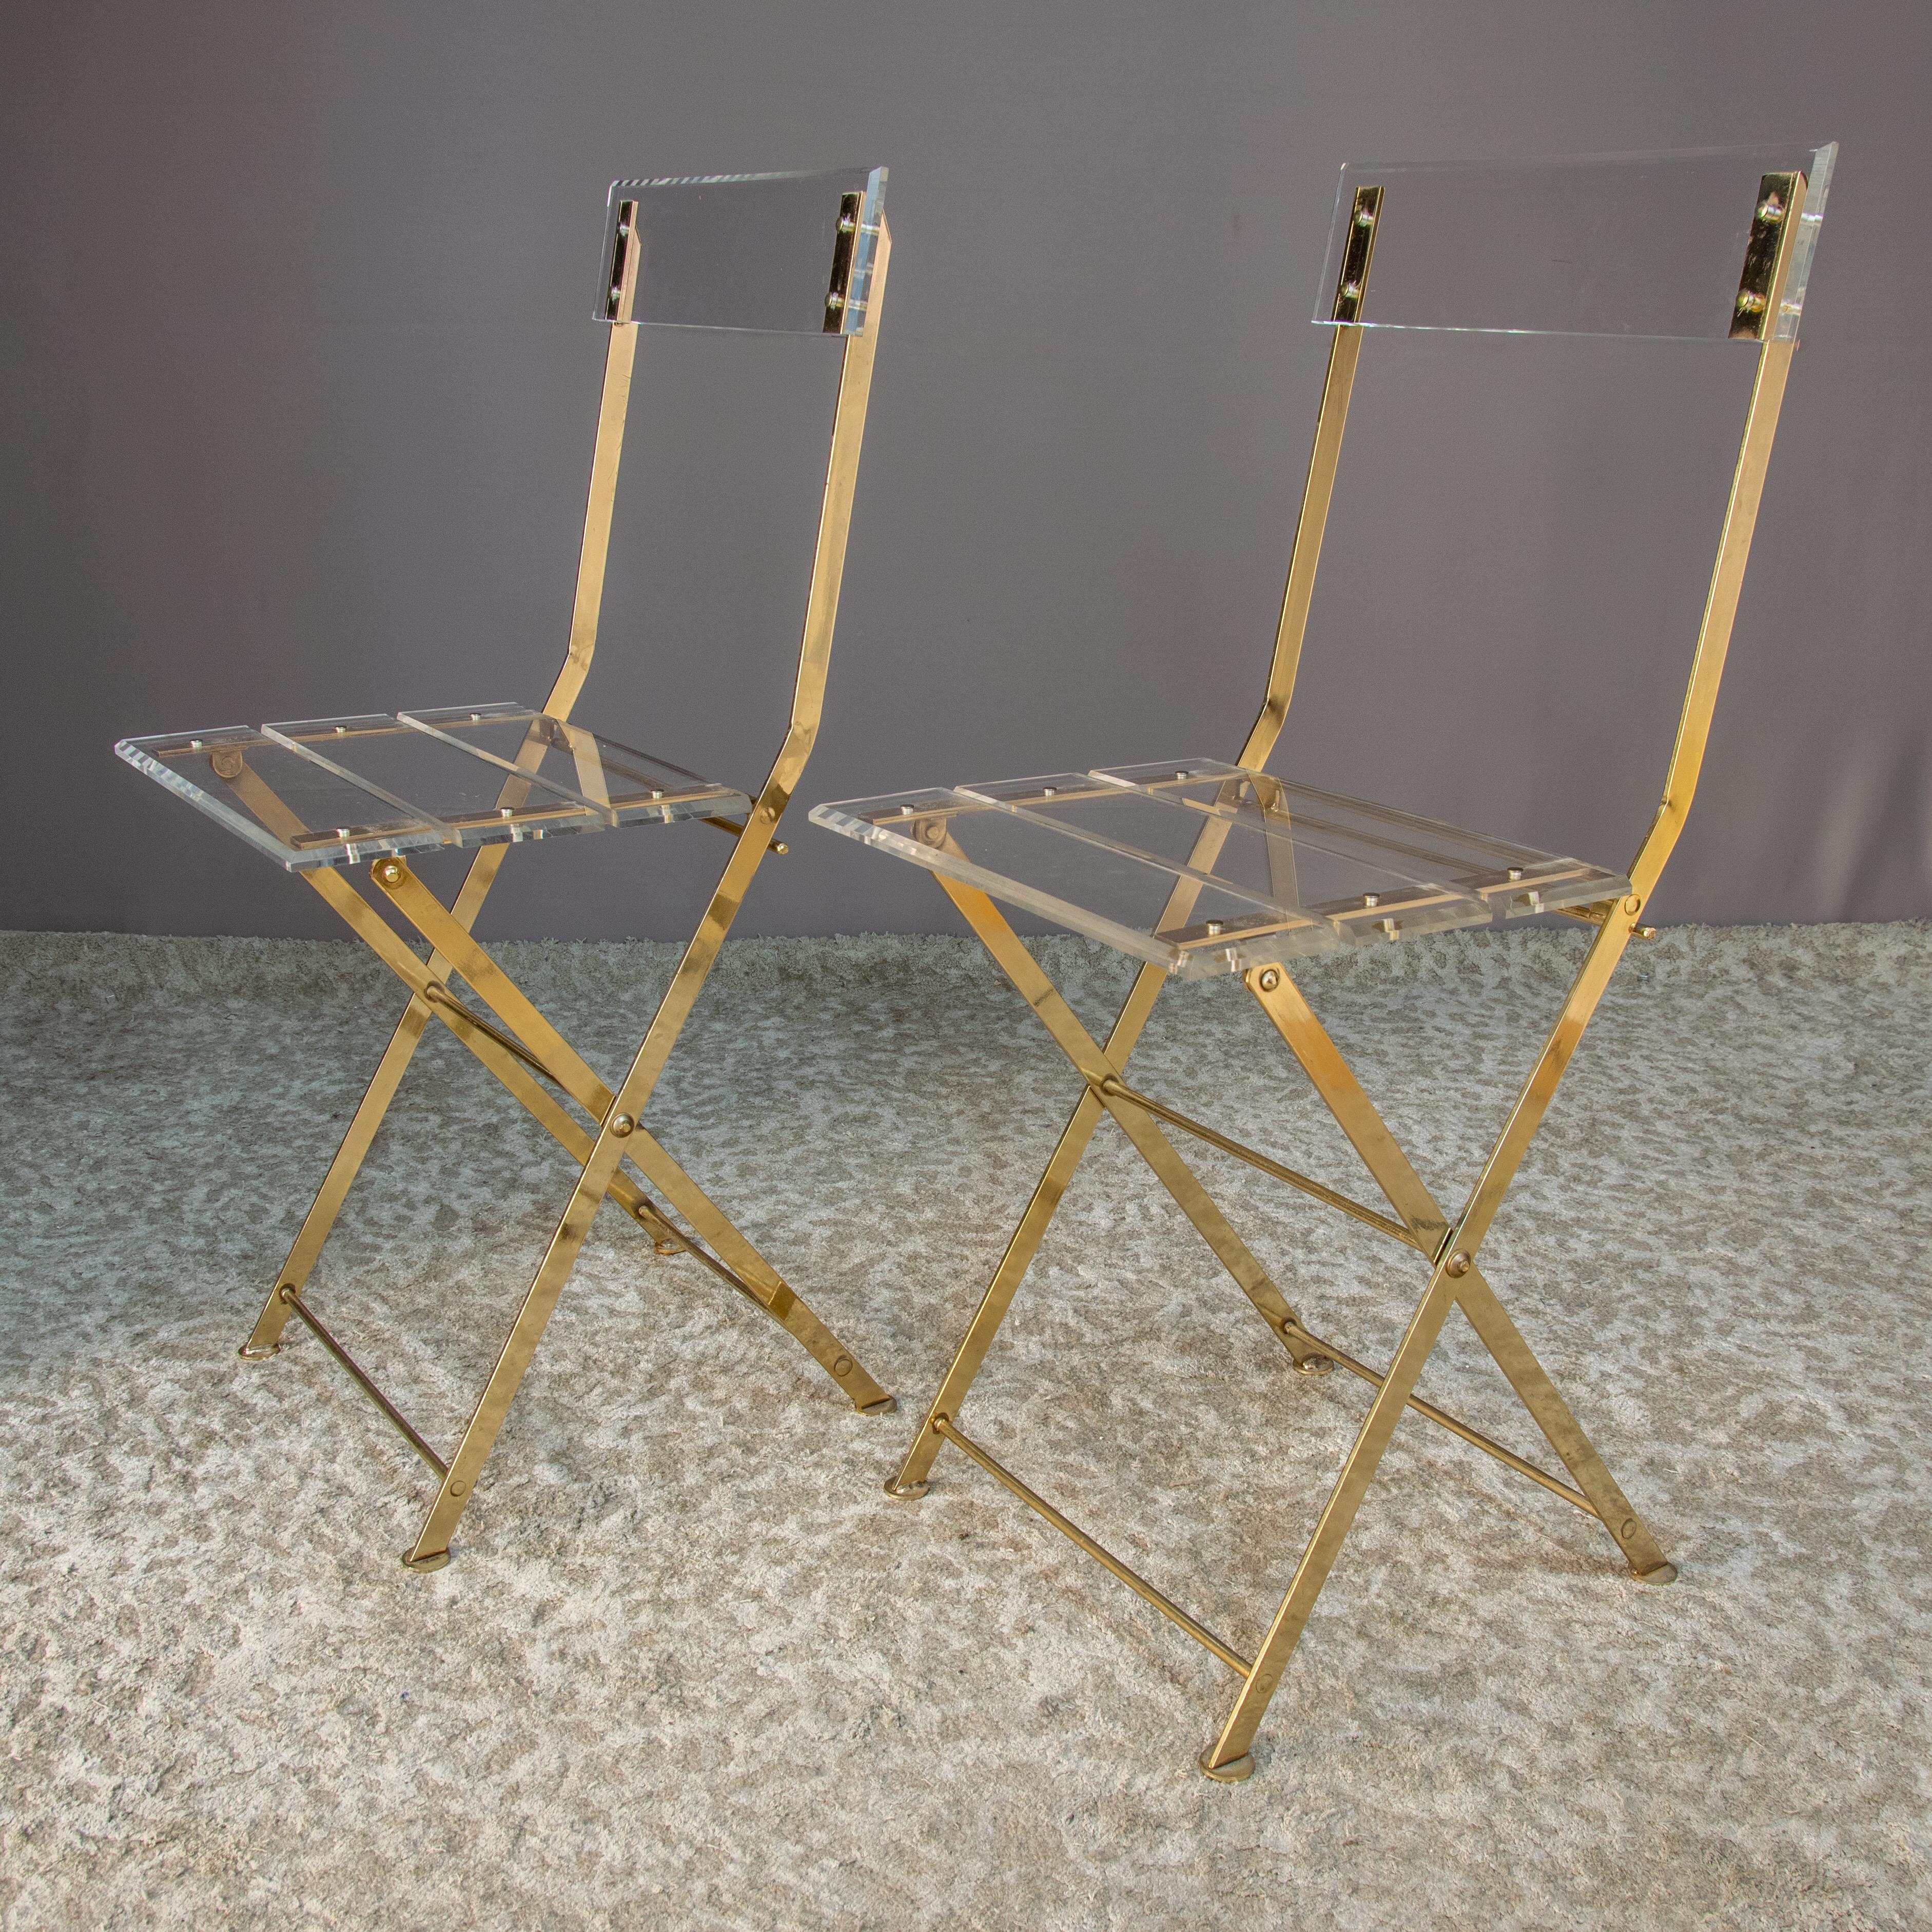 Stunning set of 2 garden style folding chairs in gilt brass and Lucite.

Only minor scuffs and imperfections on these chairs.